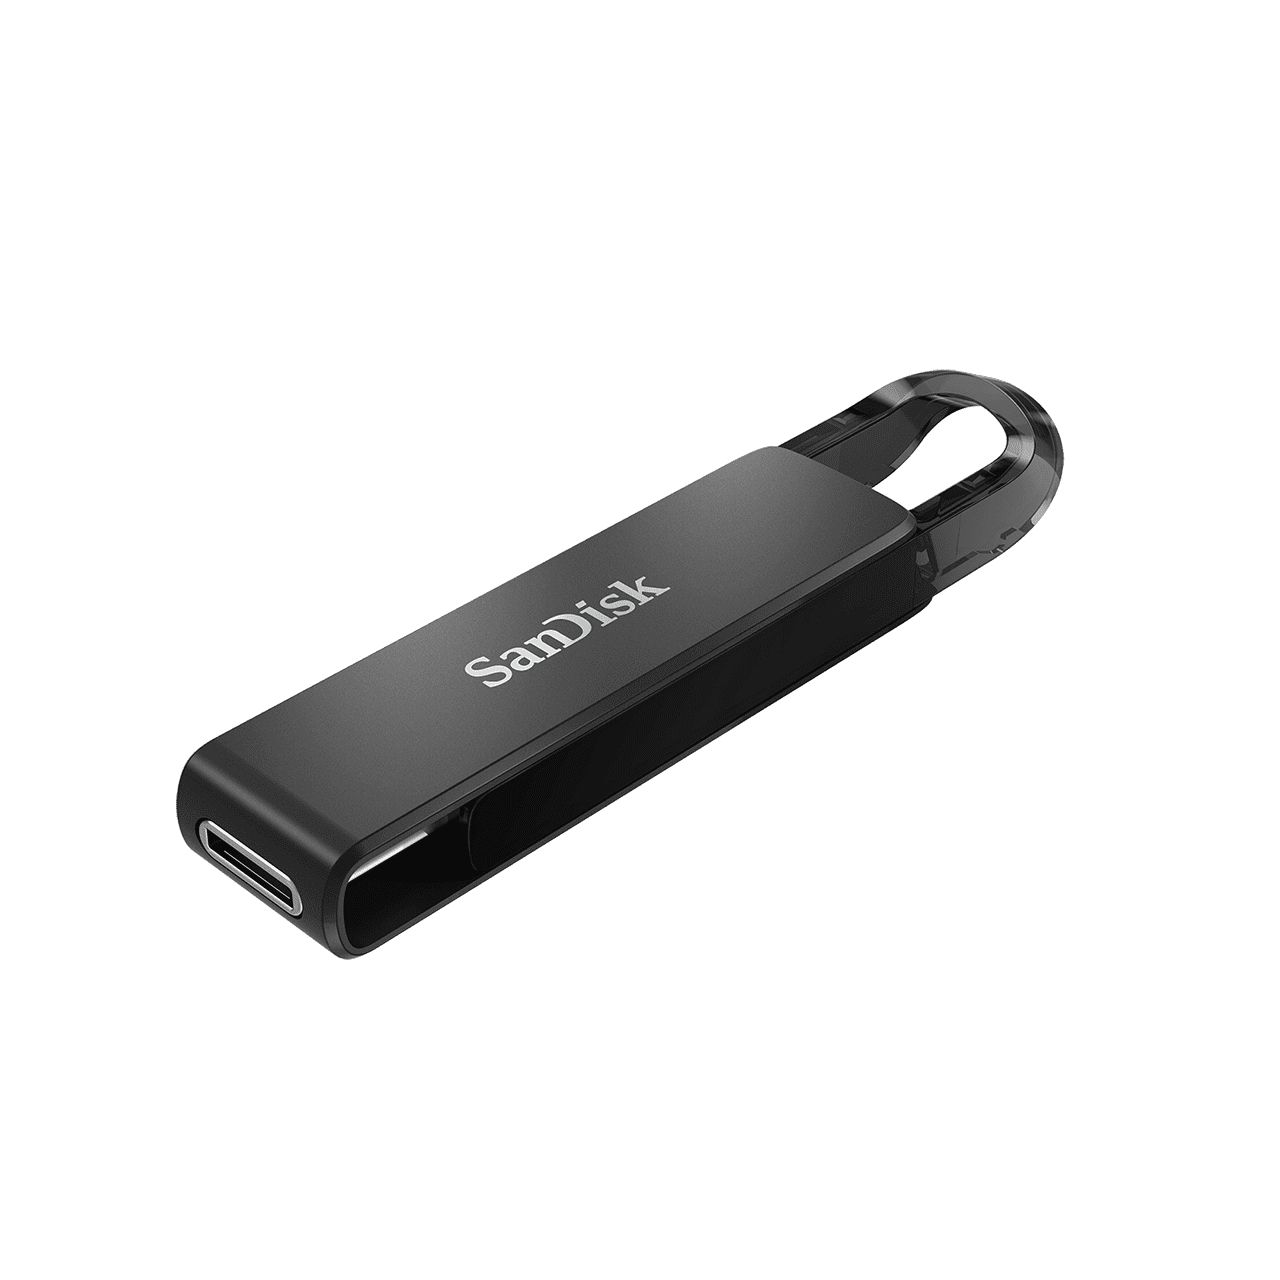 SDCZ460-32G-G46 - Pendrive SANDISK 32Gb USB-C 3.0 Lectura 150 Mb/s Negro (SDCZ460-32G-G46)